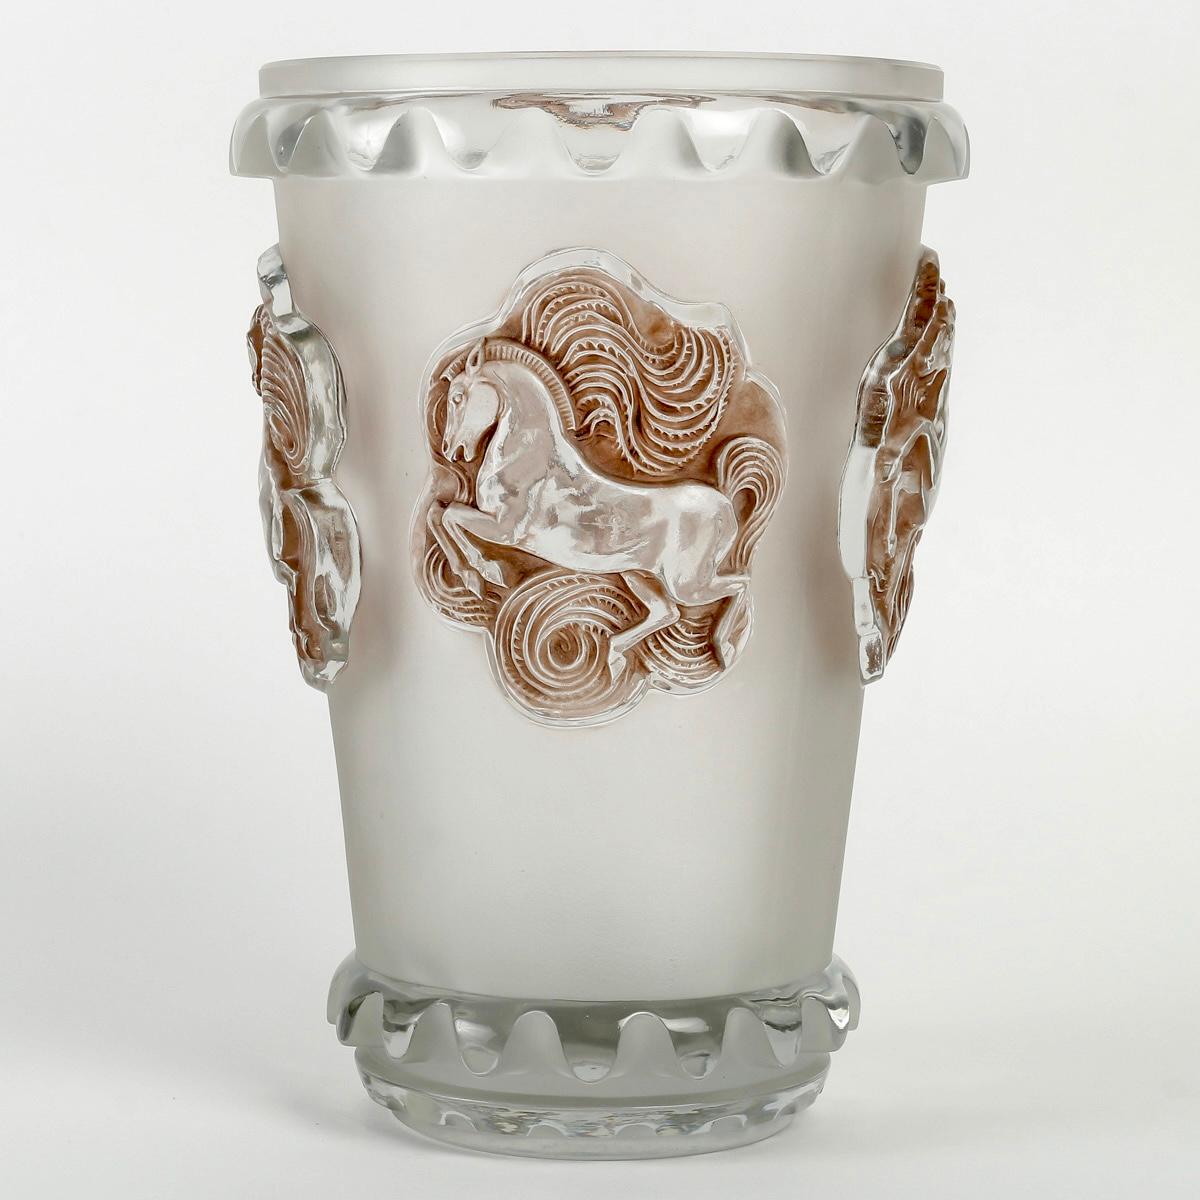 Molded 1942 Rene Lalique Vase Camargue Frosted Glass with Sepia Patina